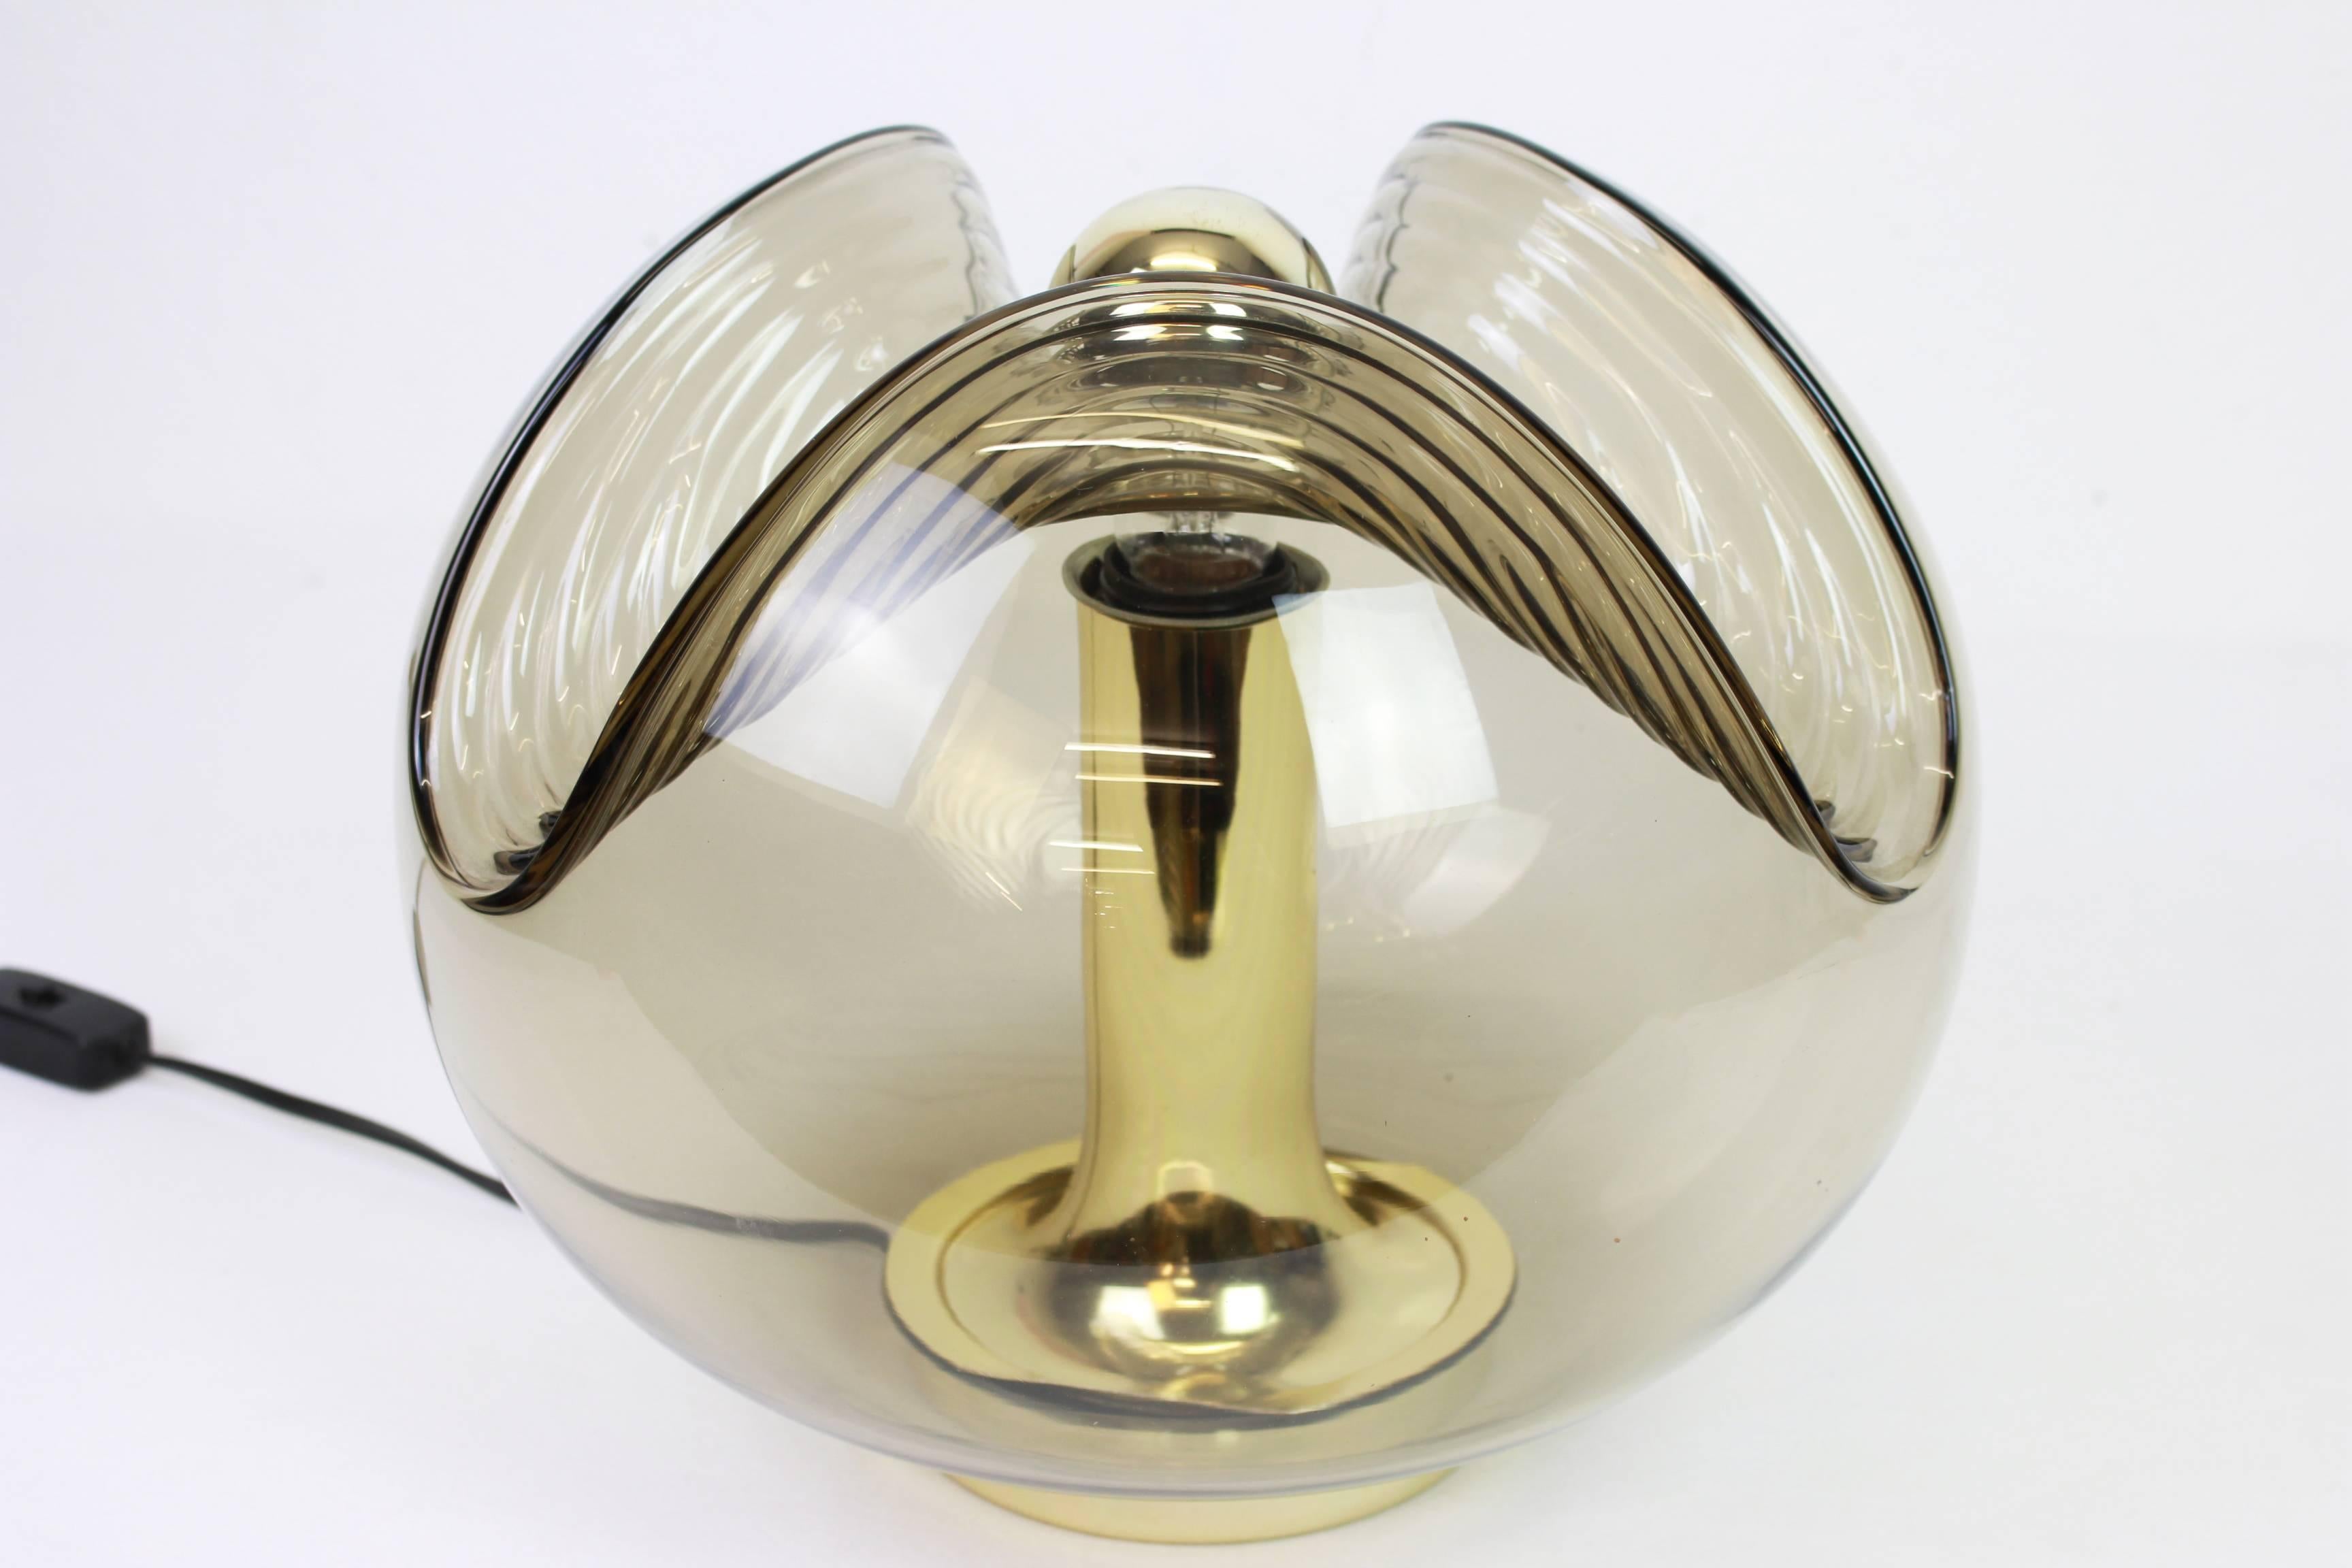 A special pair of round Biomorphic smoked glass table lamps designed by Koch & Lowy for Peill & Putzler, manufactured in Germany, circa 1970s.

High quality and in very good condition. Cleaned, well-wired and ready to use. 

Each fixture requires 1